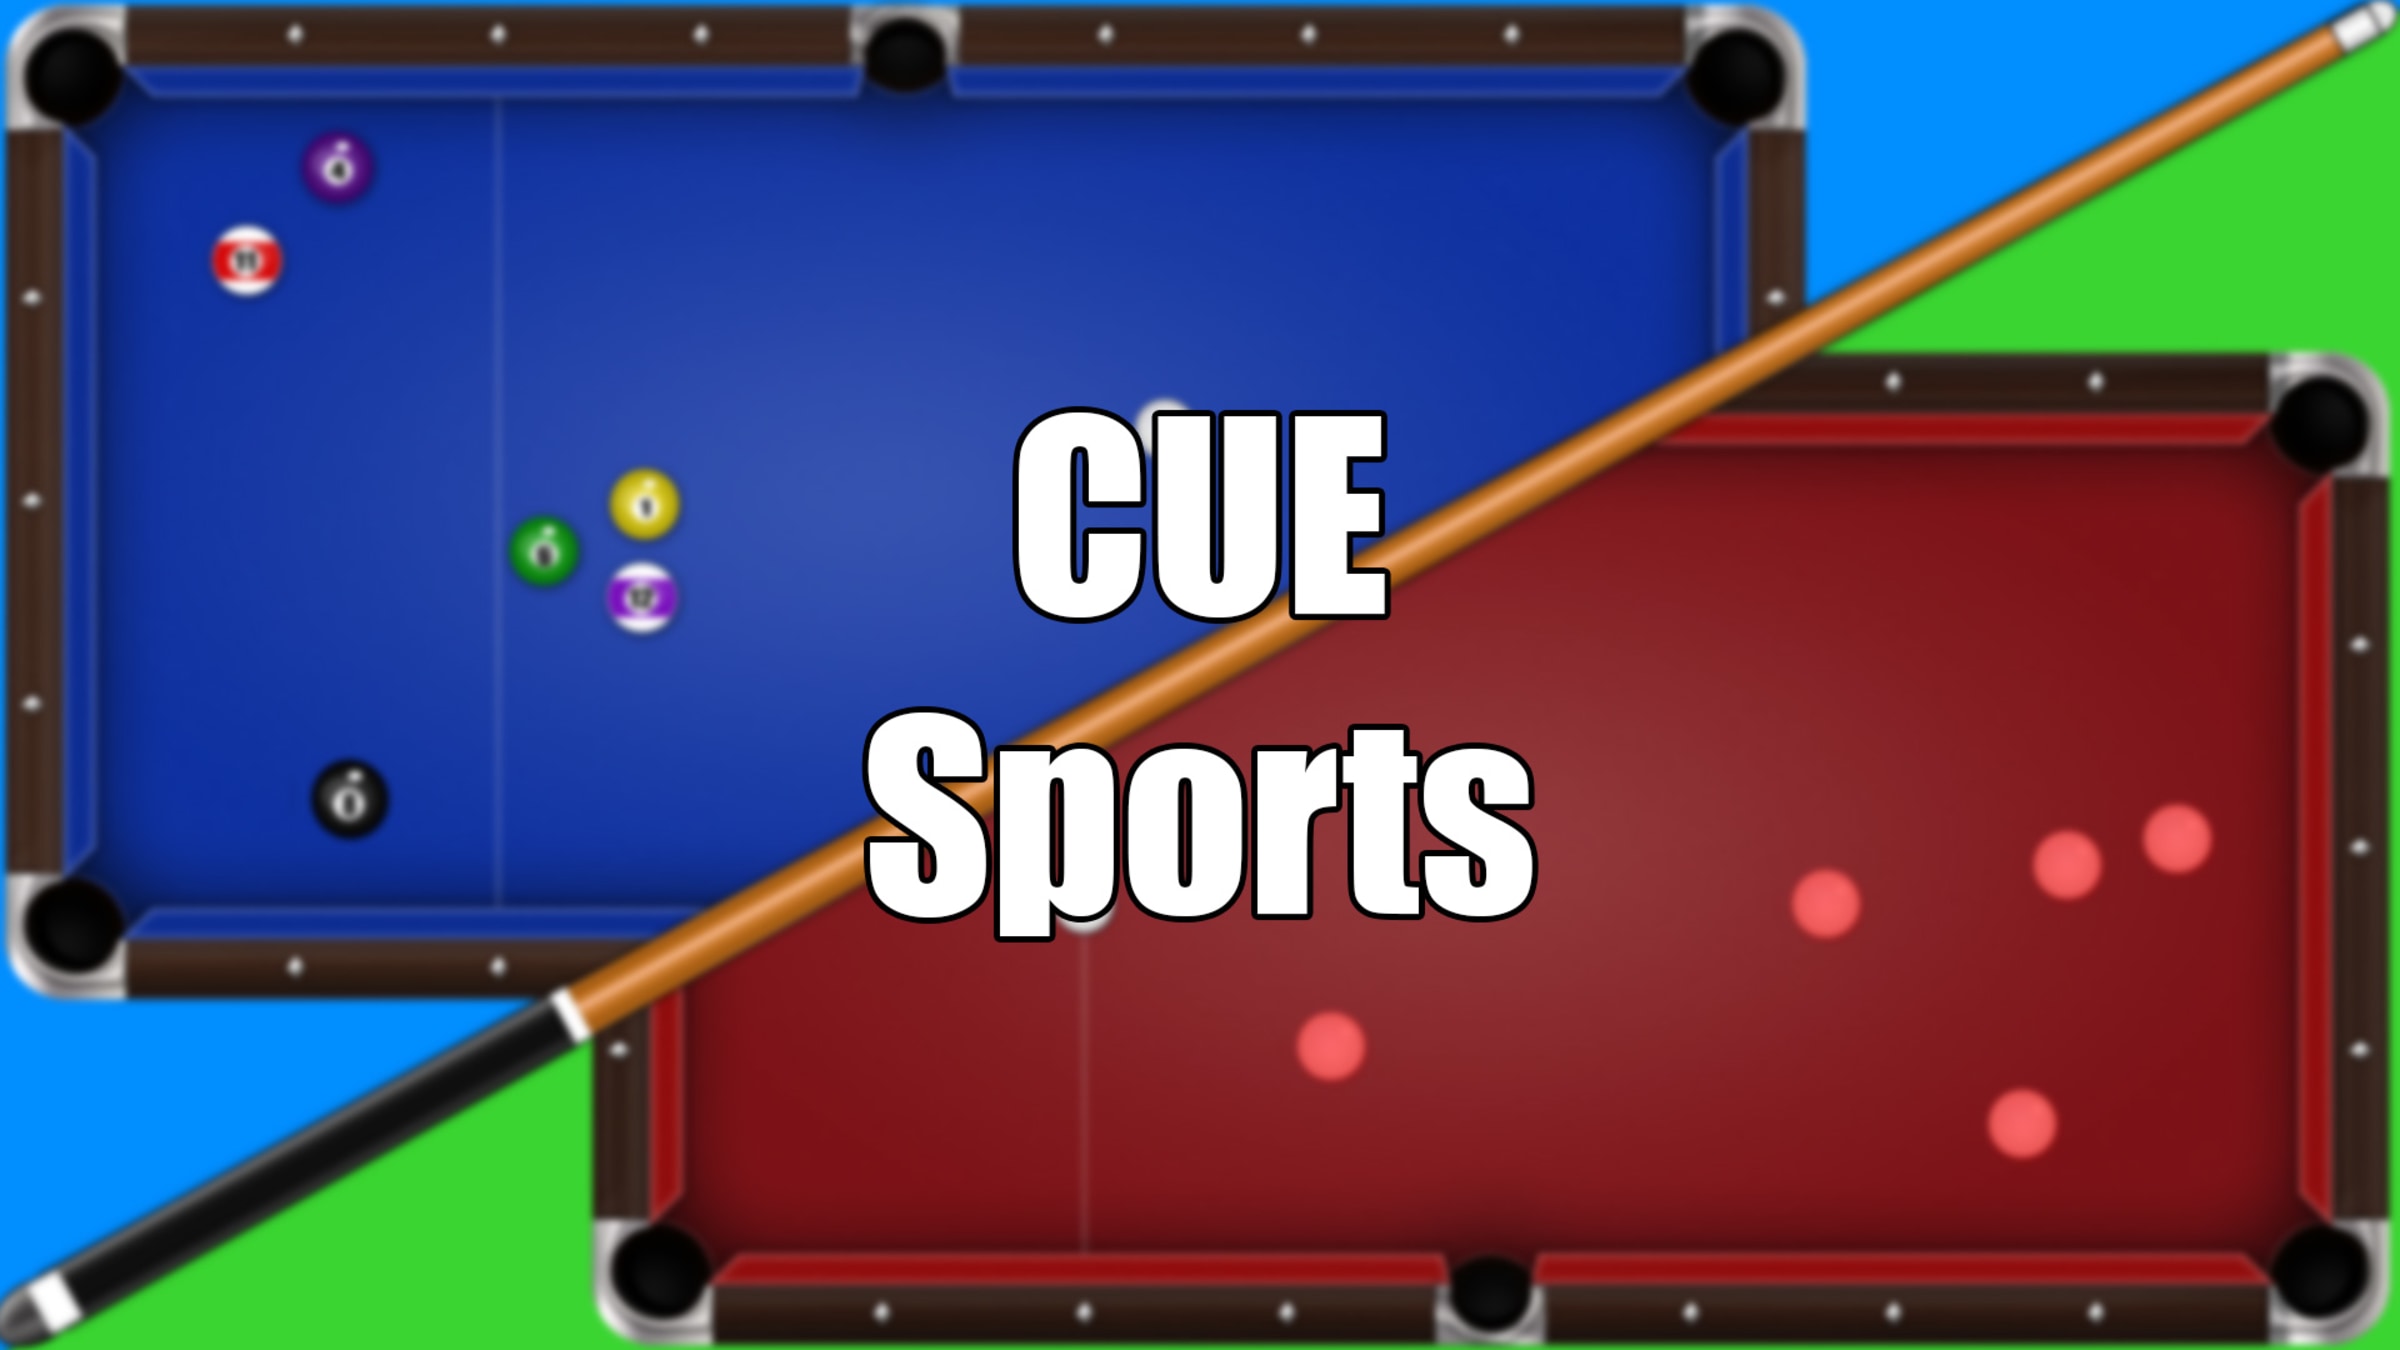 Cue Sports for Nintendo Switch